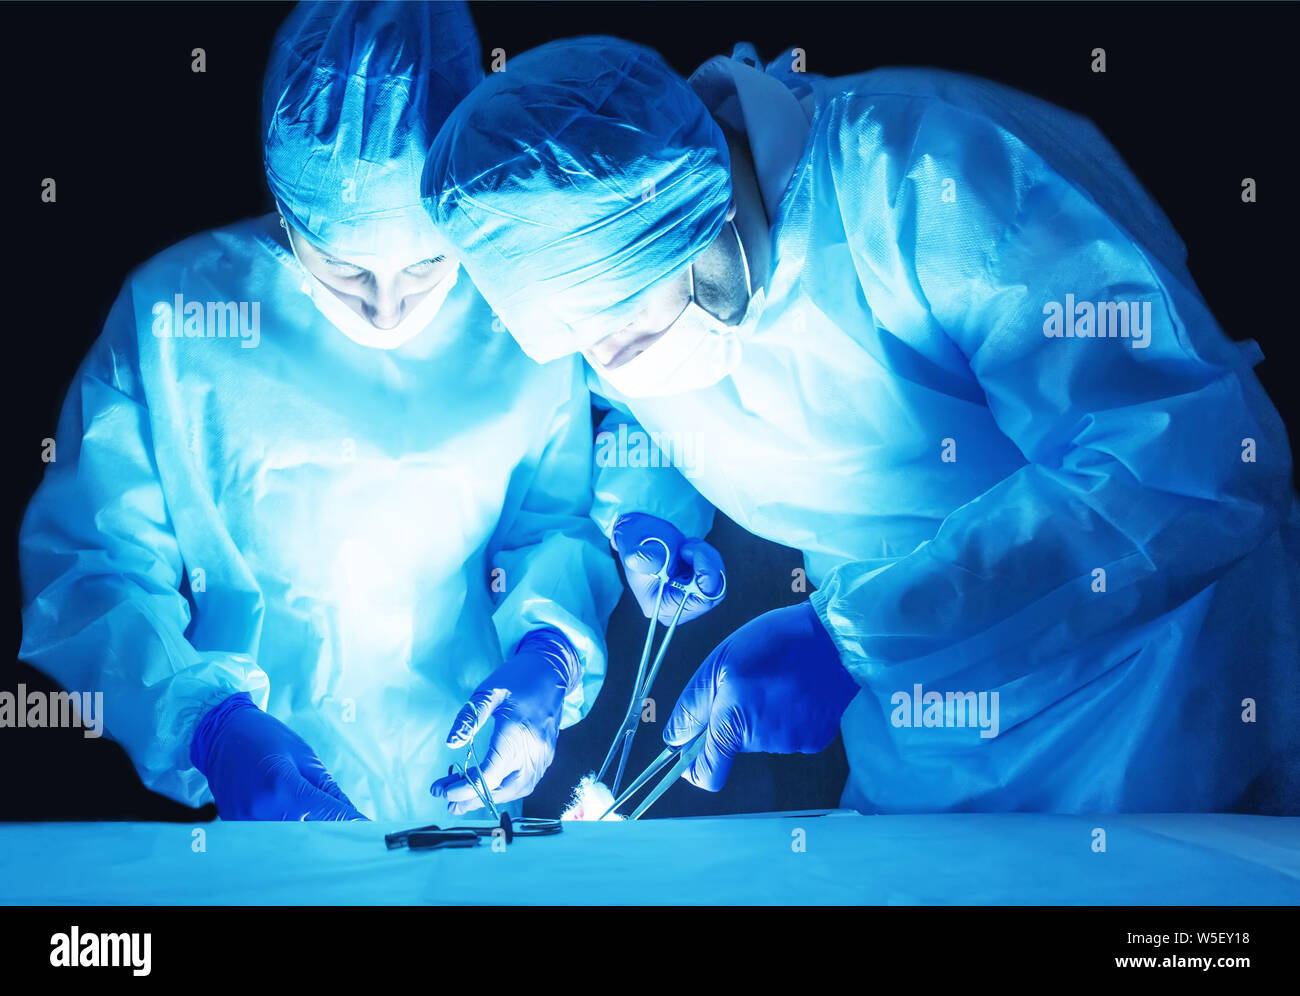 Two surgeons, a man and a woman, perform surgery to remove prostate adenoma and varicocele, fibroadenoma, operating theater Stock Photo